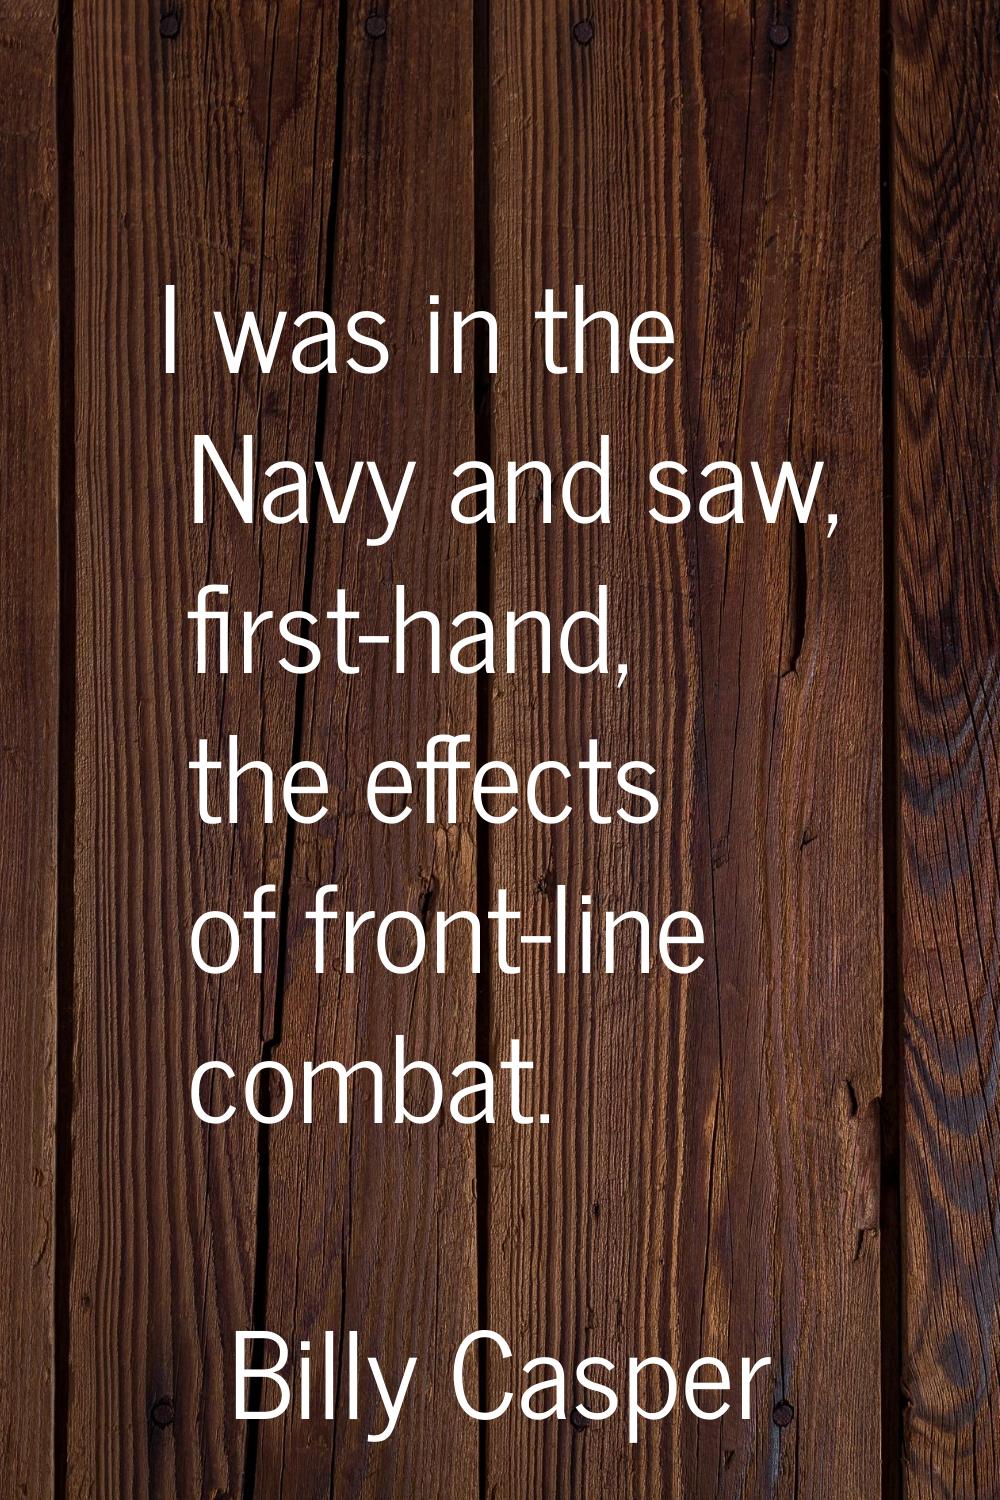 I was in the Navy and saw, first-hand, the effects of front-line combat.